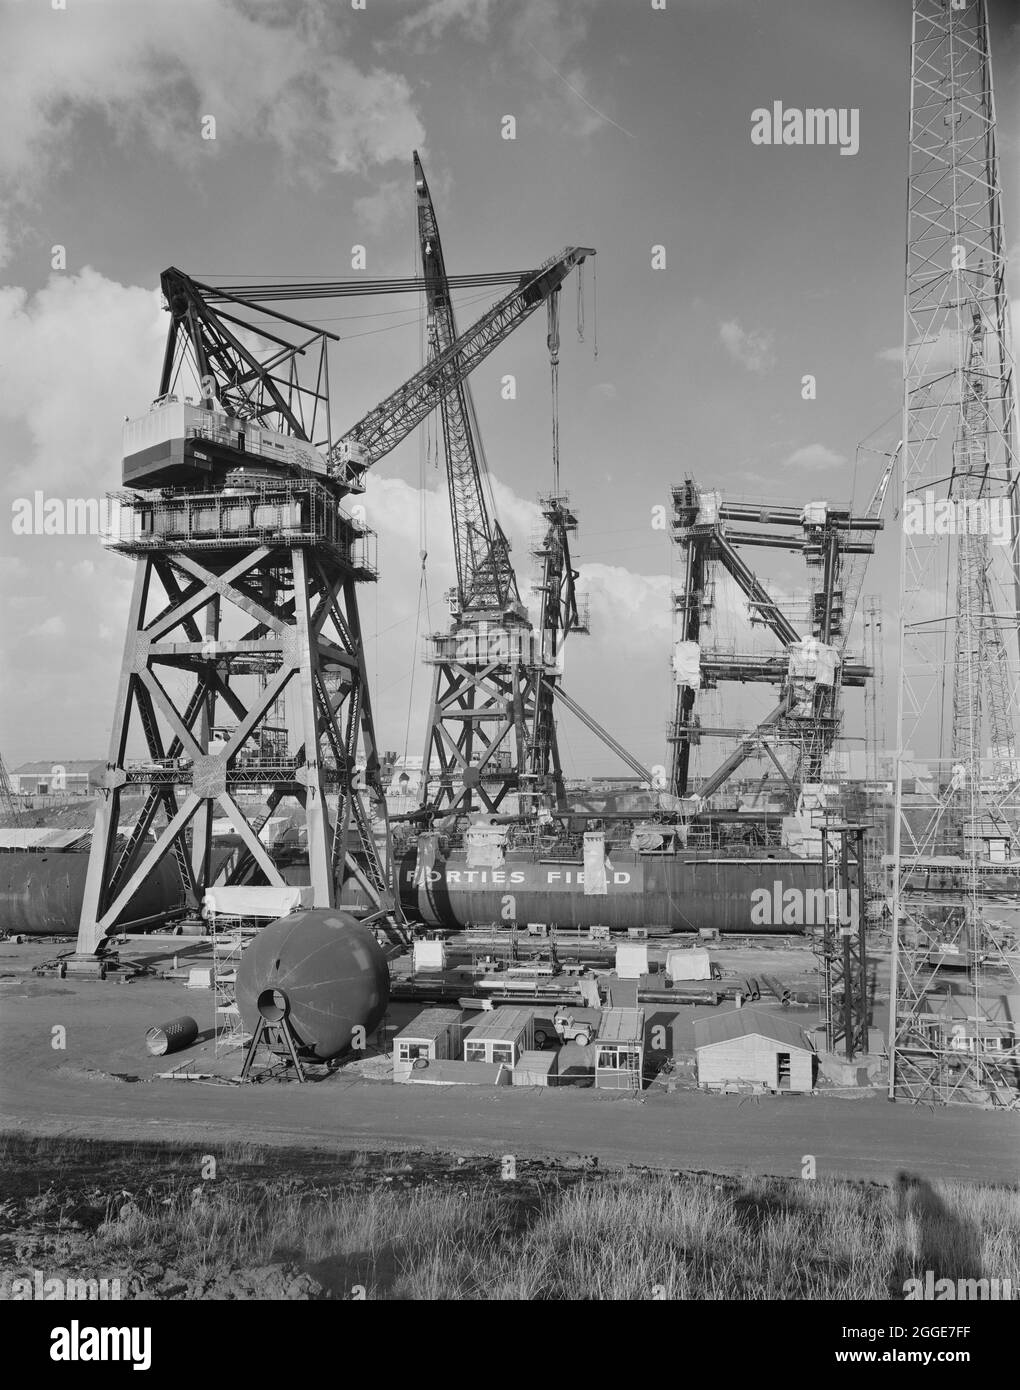 A view of the construction of an oil platform at Graythorp, showing ...